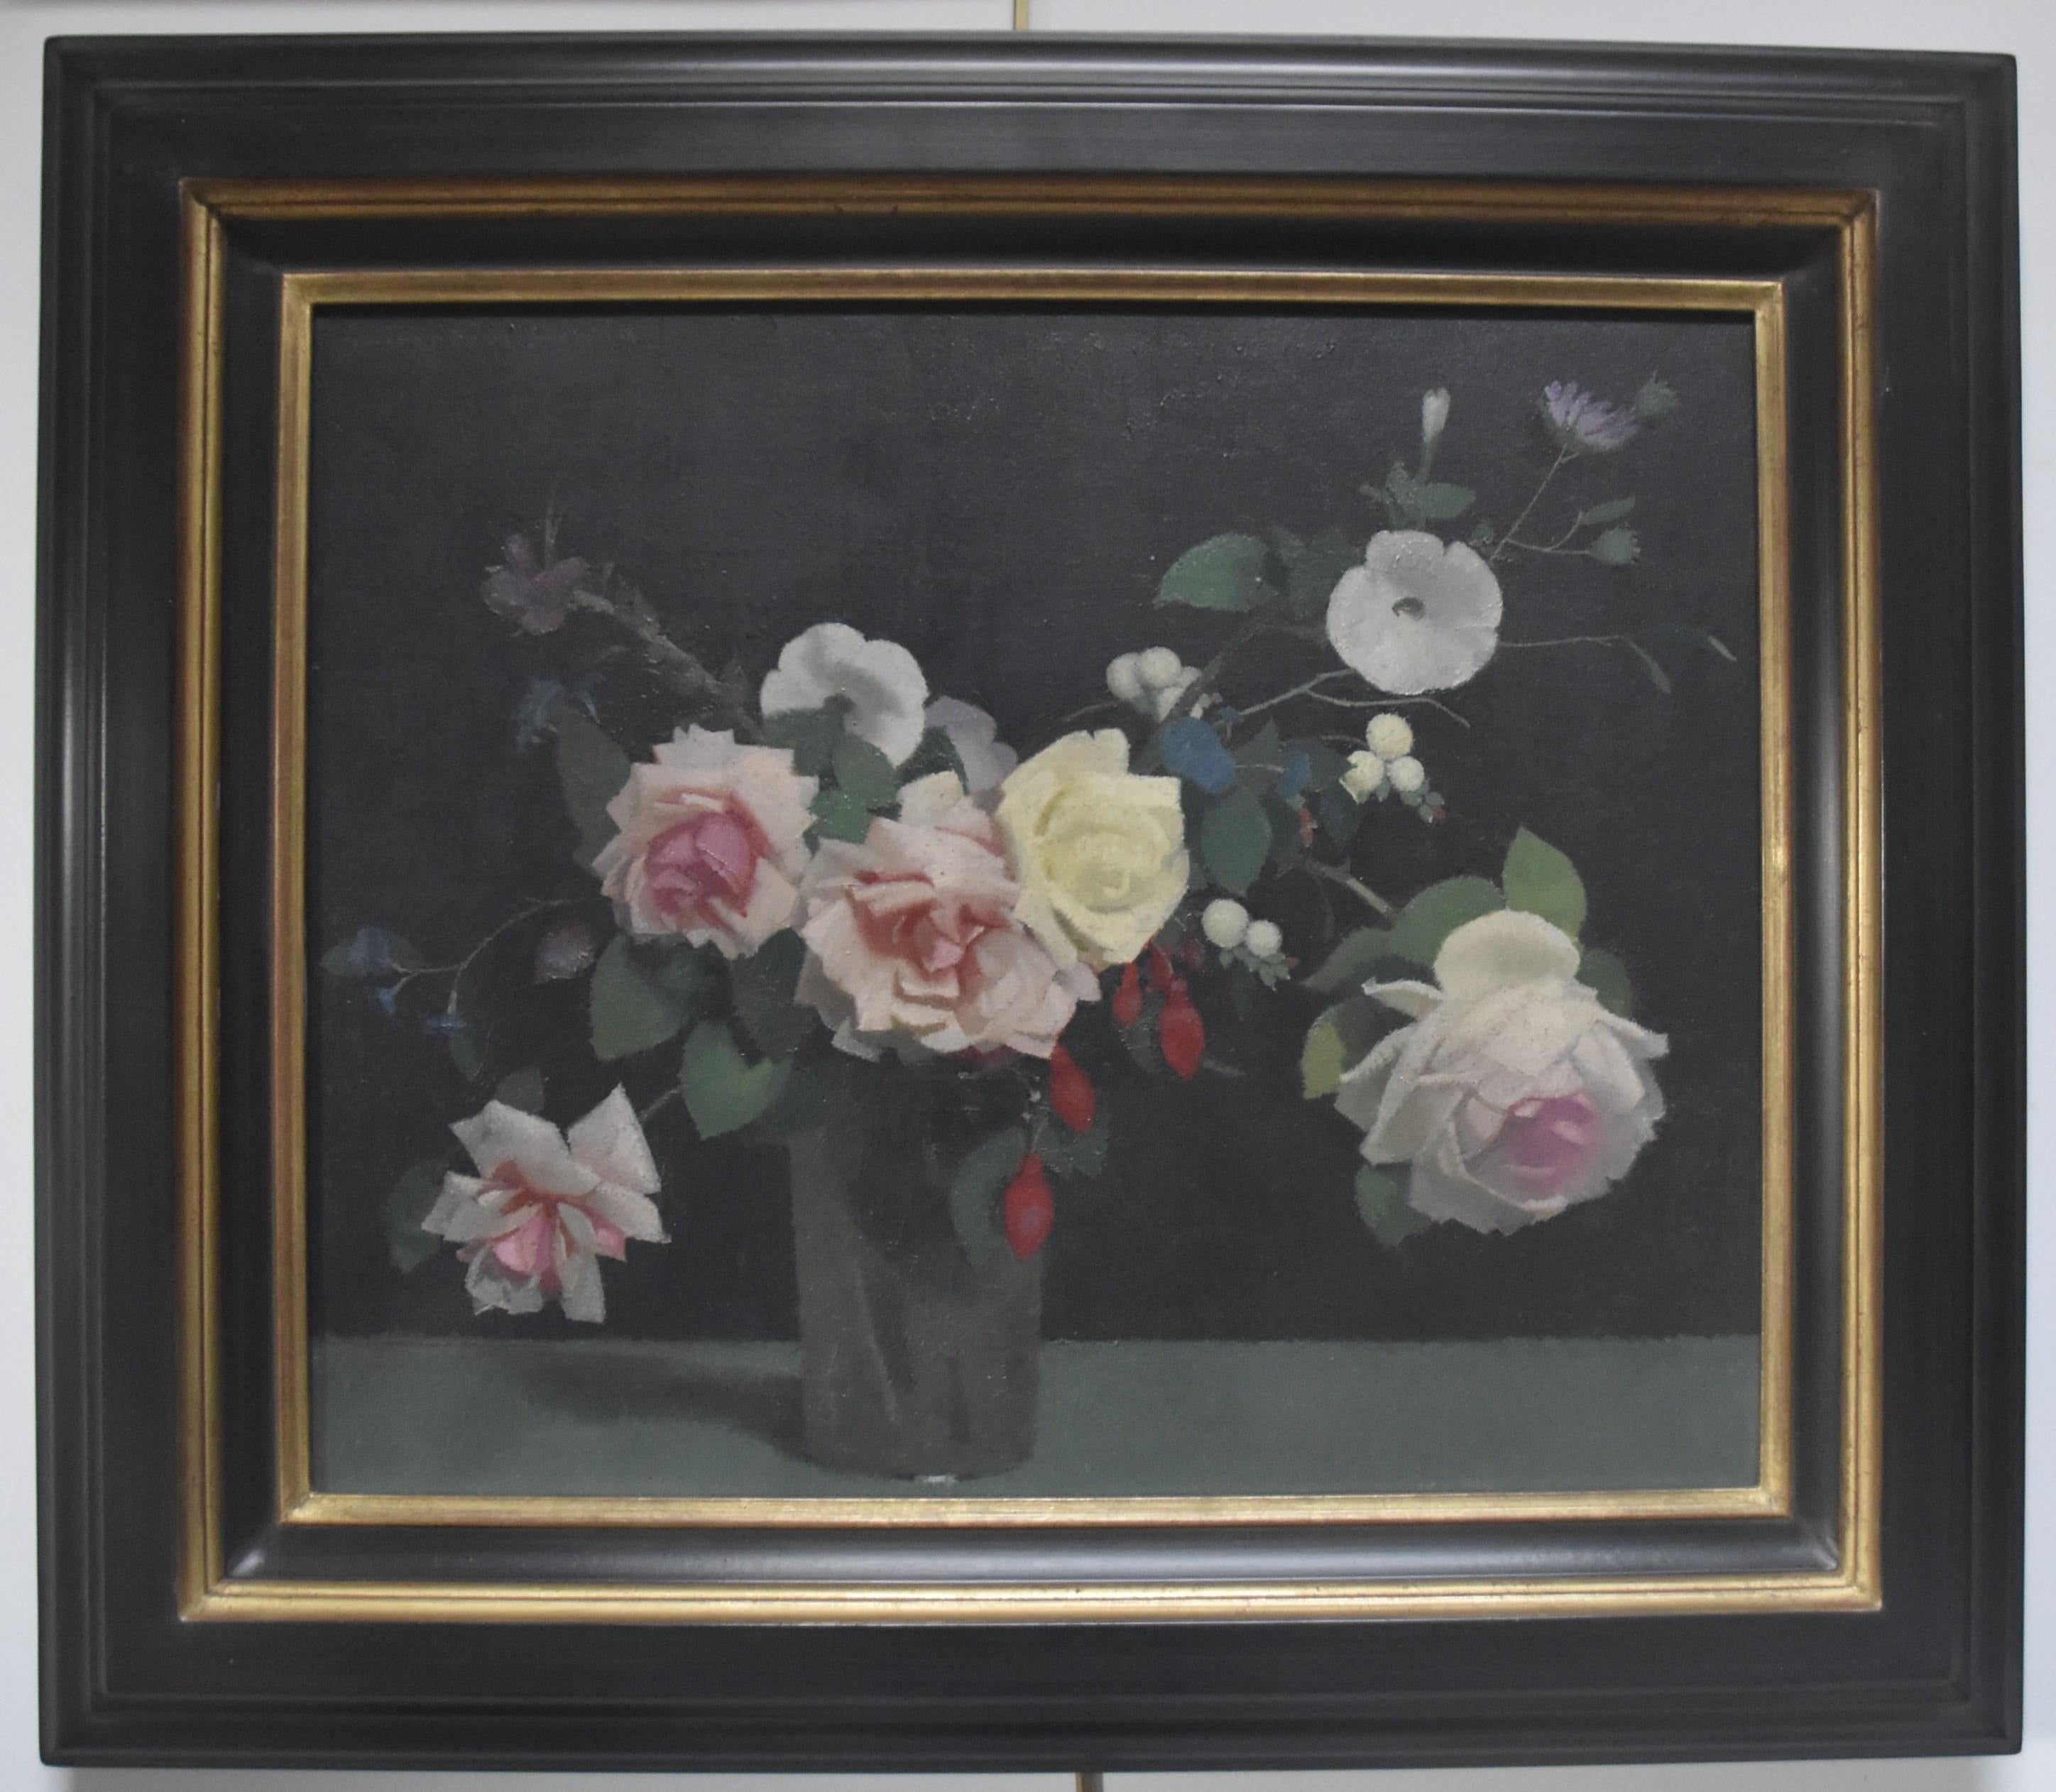  Lucien Victor Guirand de Scevola  (1871-1950) A bunch of flowers, oil on canvas - Painting by Lucien-Victor Guirand de Scévola